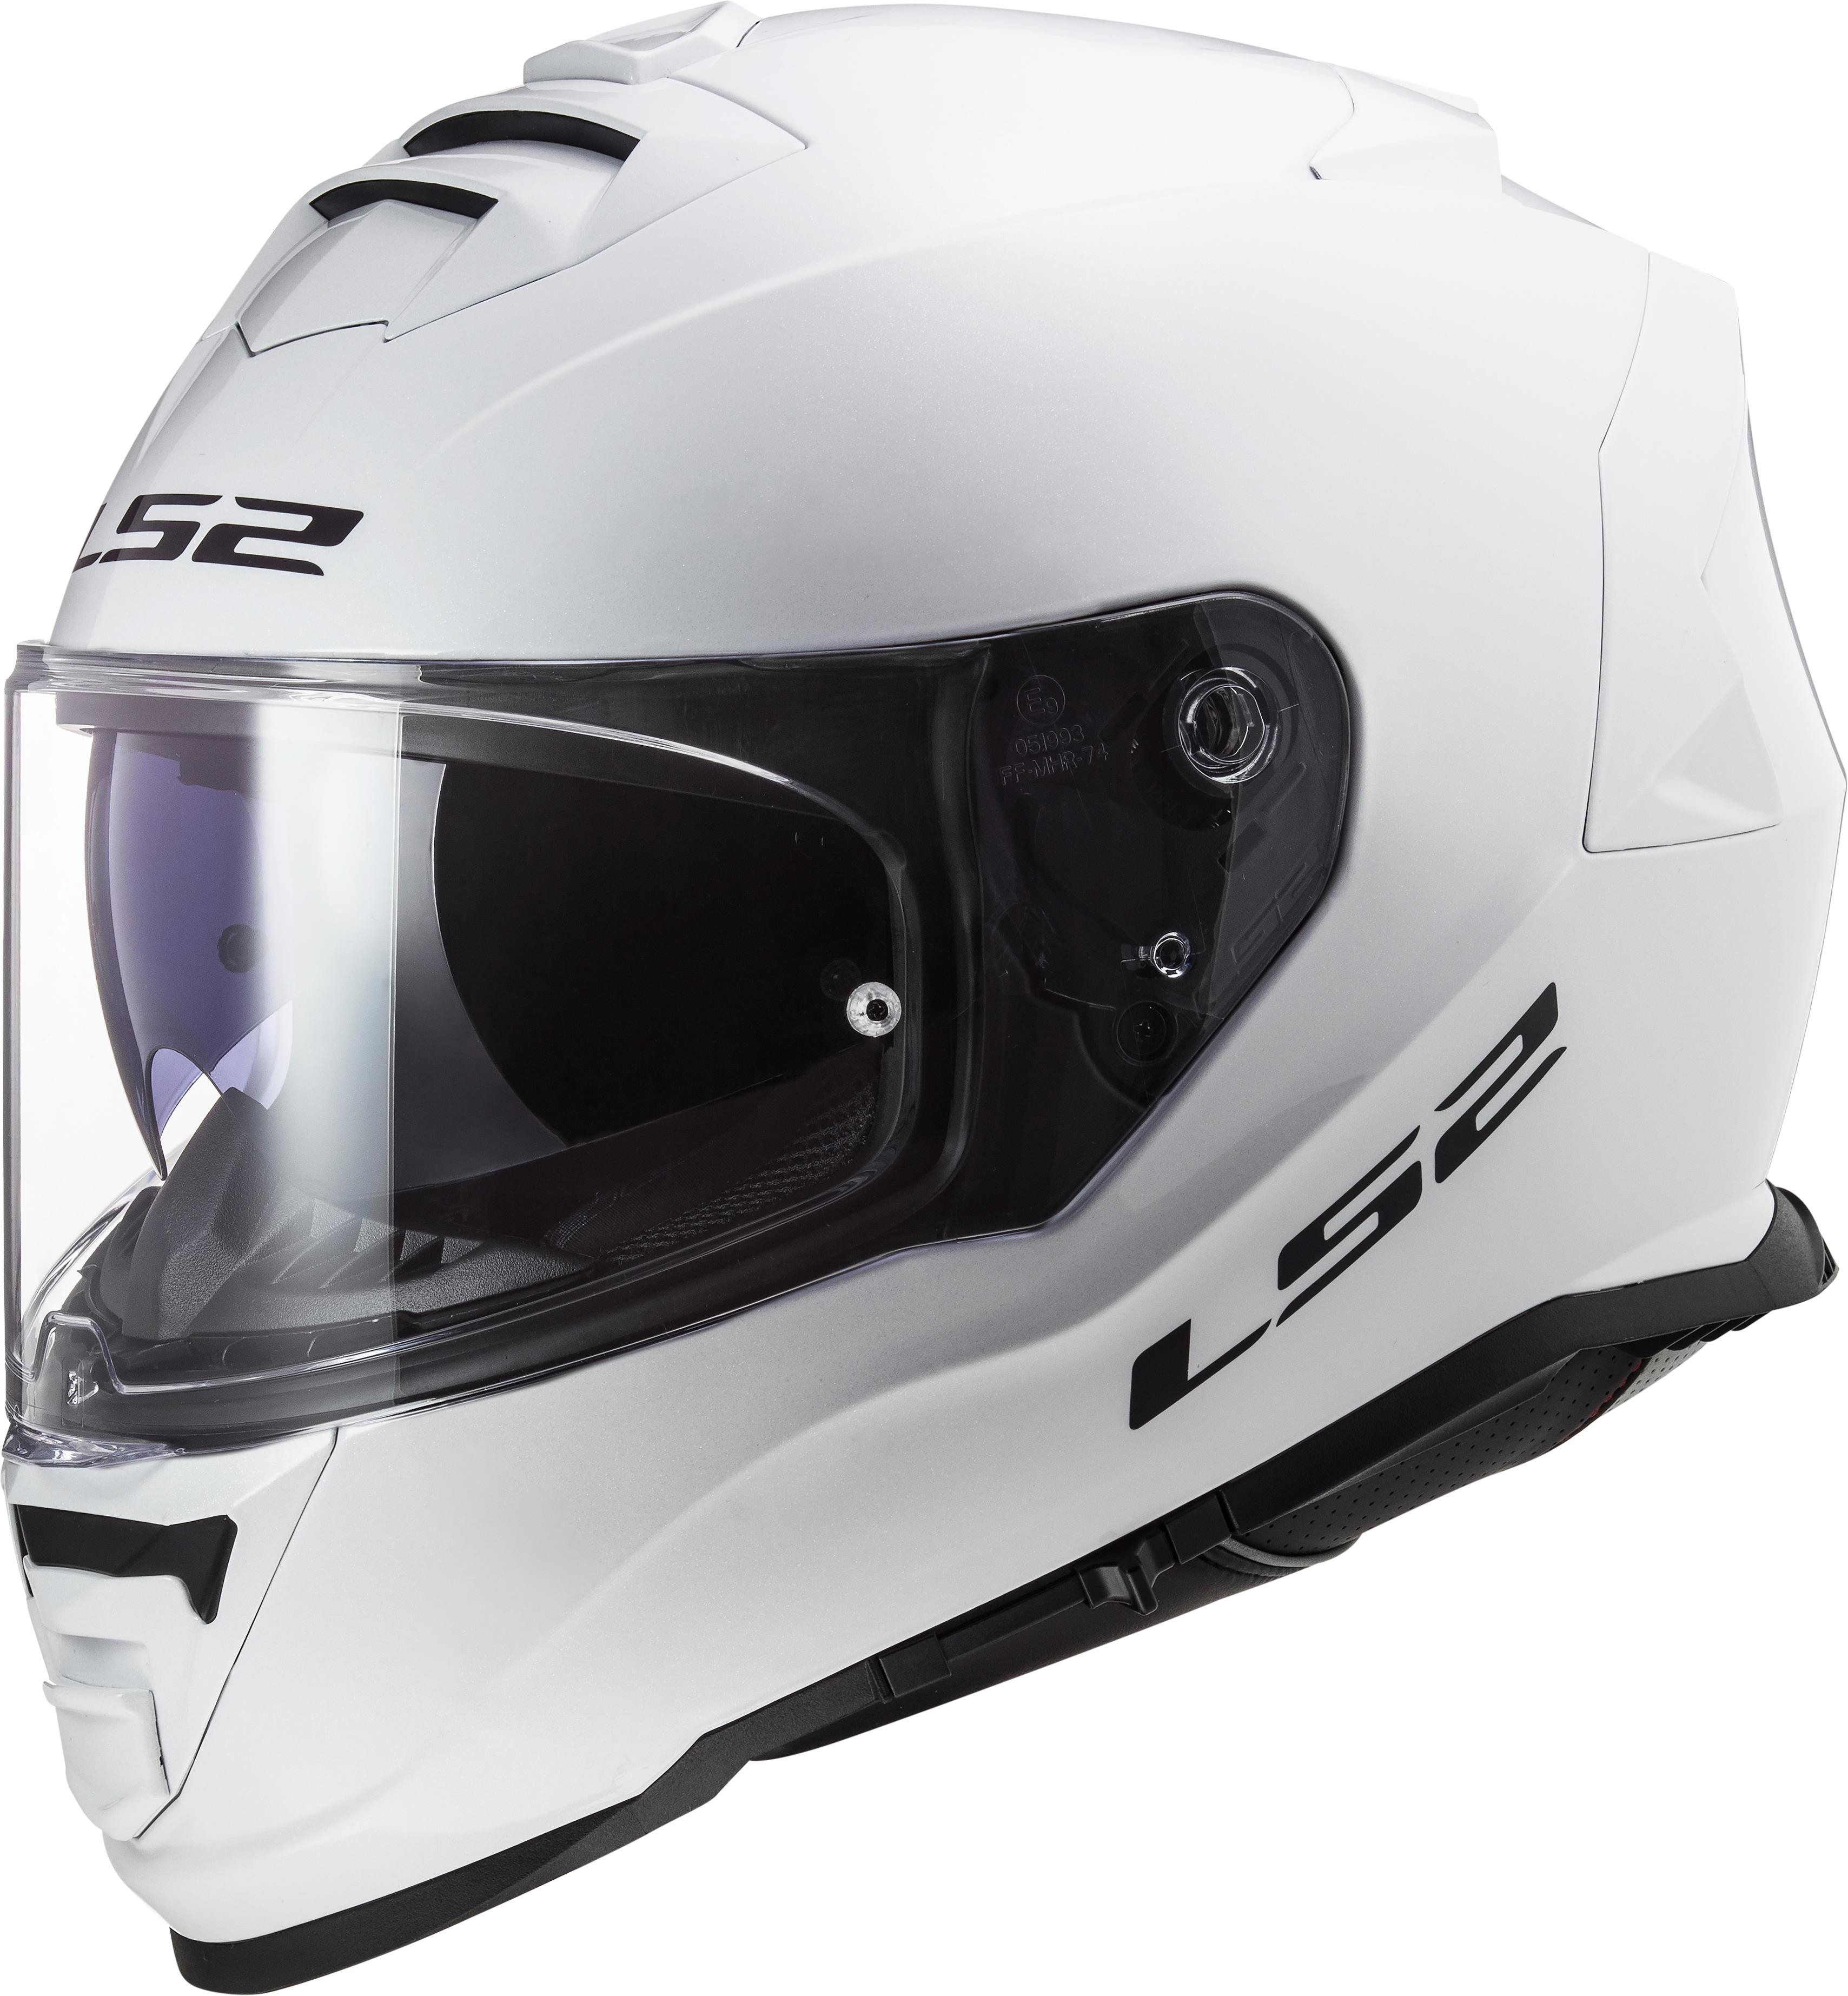 Ls2 Ff800 Storm Solid White S